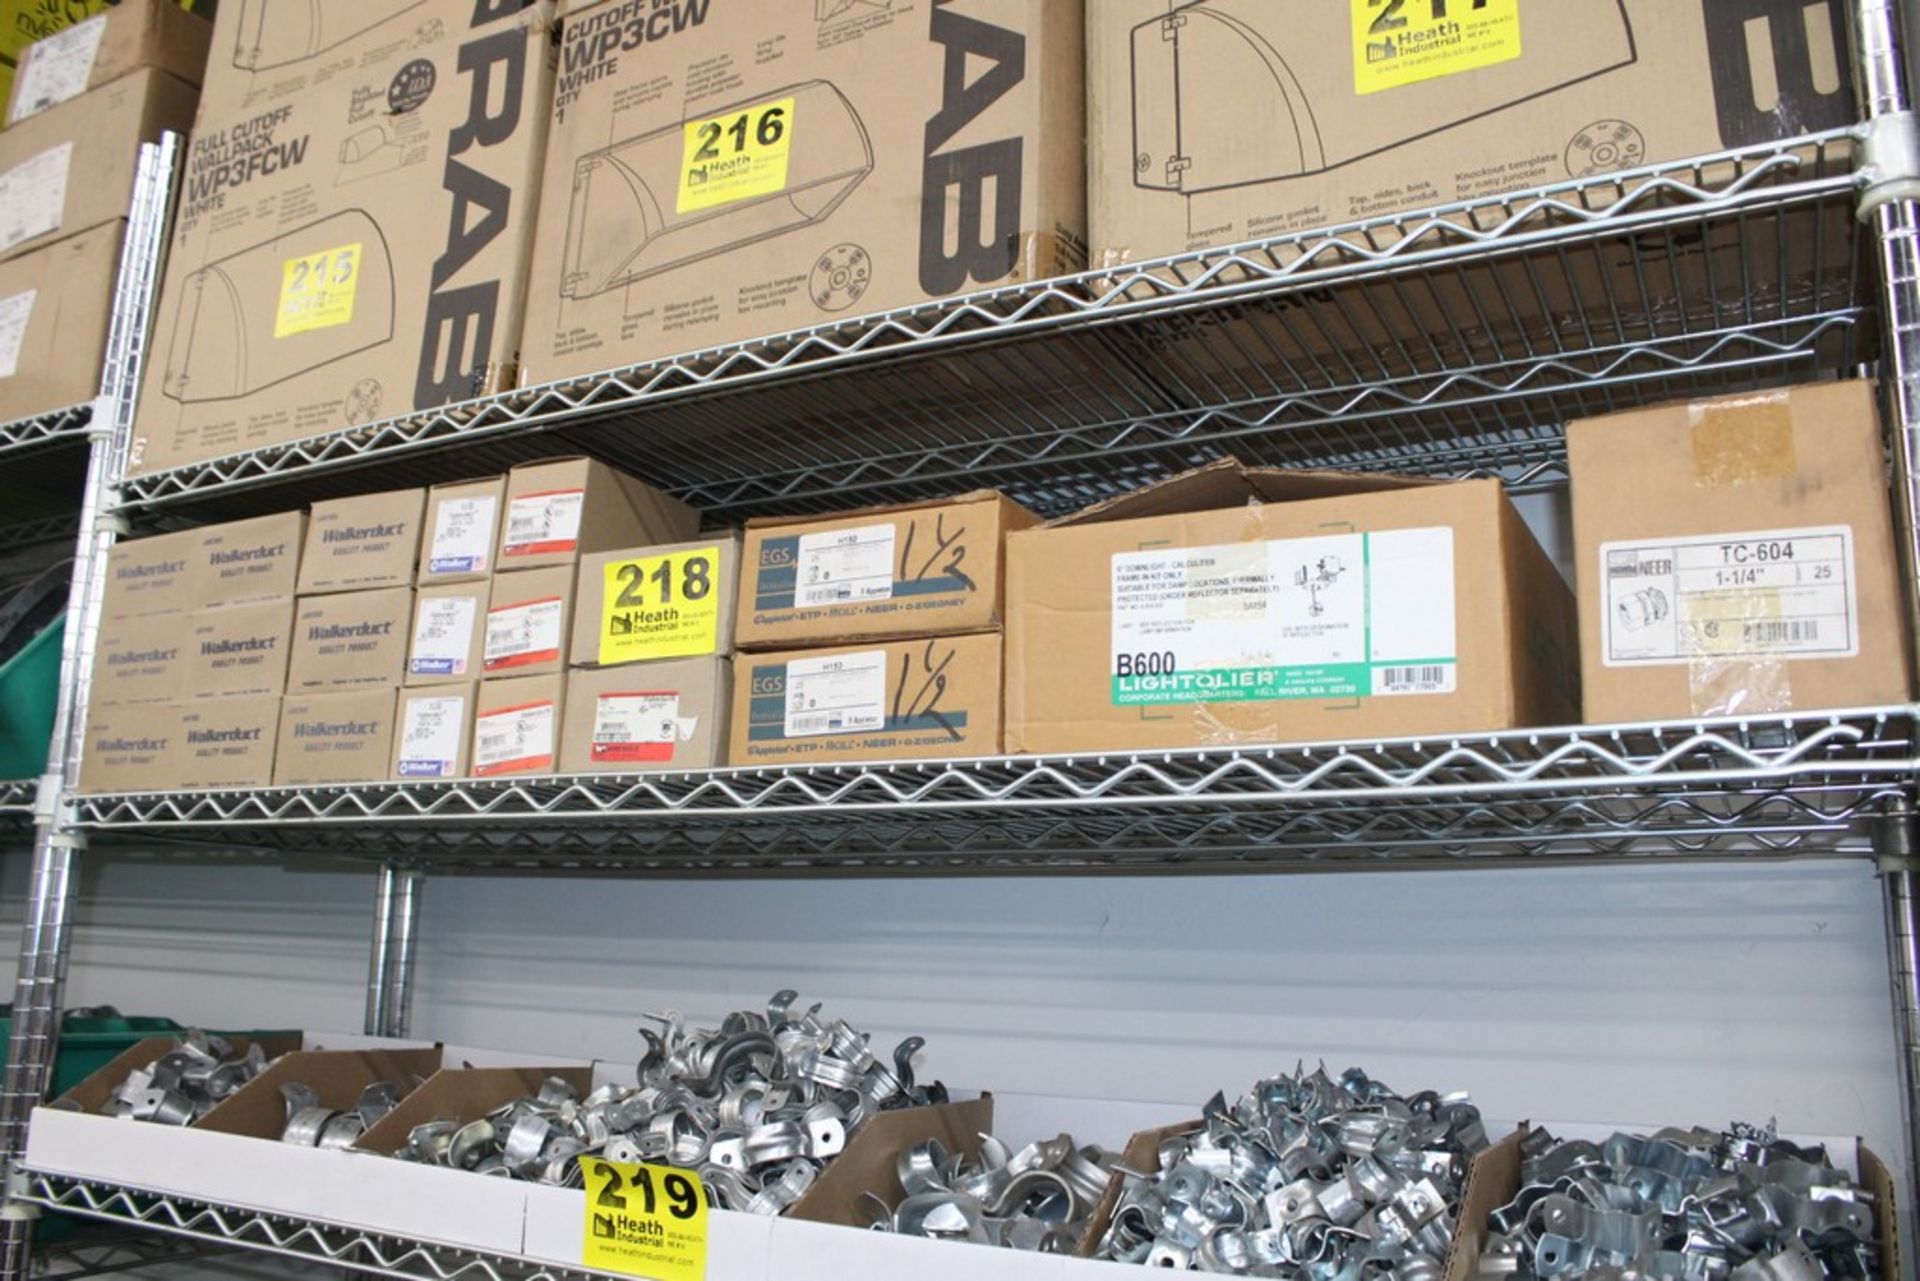 ASSORTED CONDUIT HANGERS AND FITTINGS ON SHELF